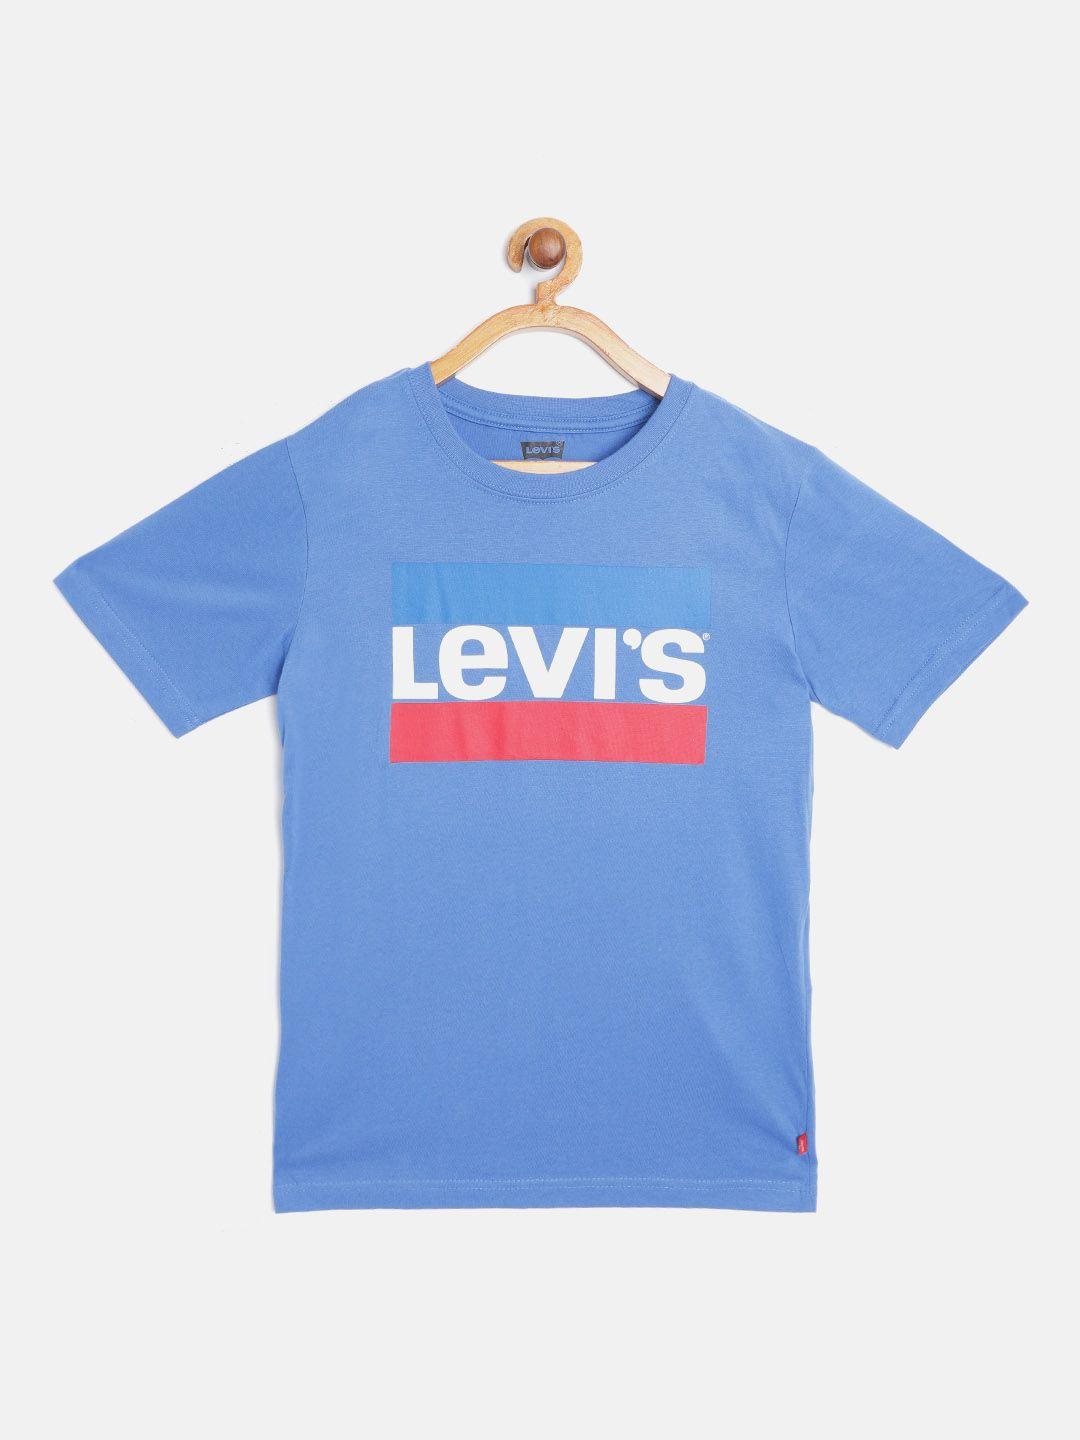 levis-boys-blue-&-red-brand-logo-printed-pure-cotton-t-shirt